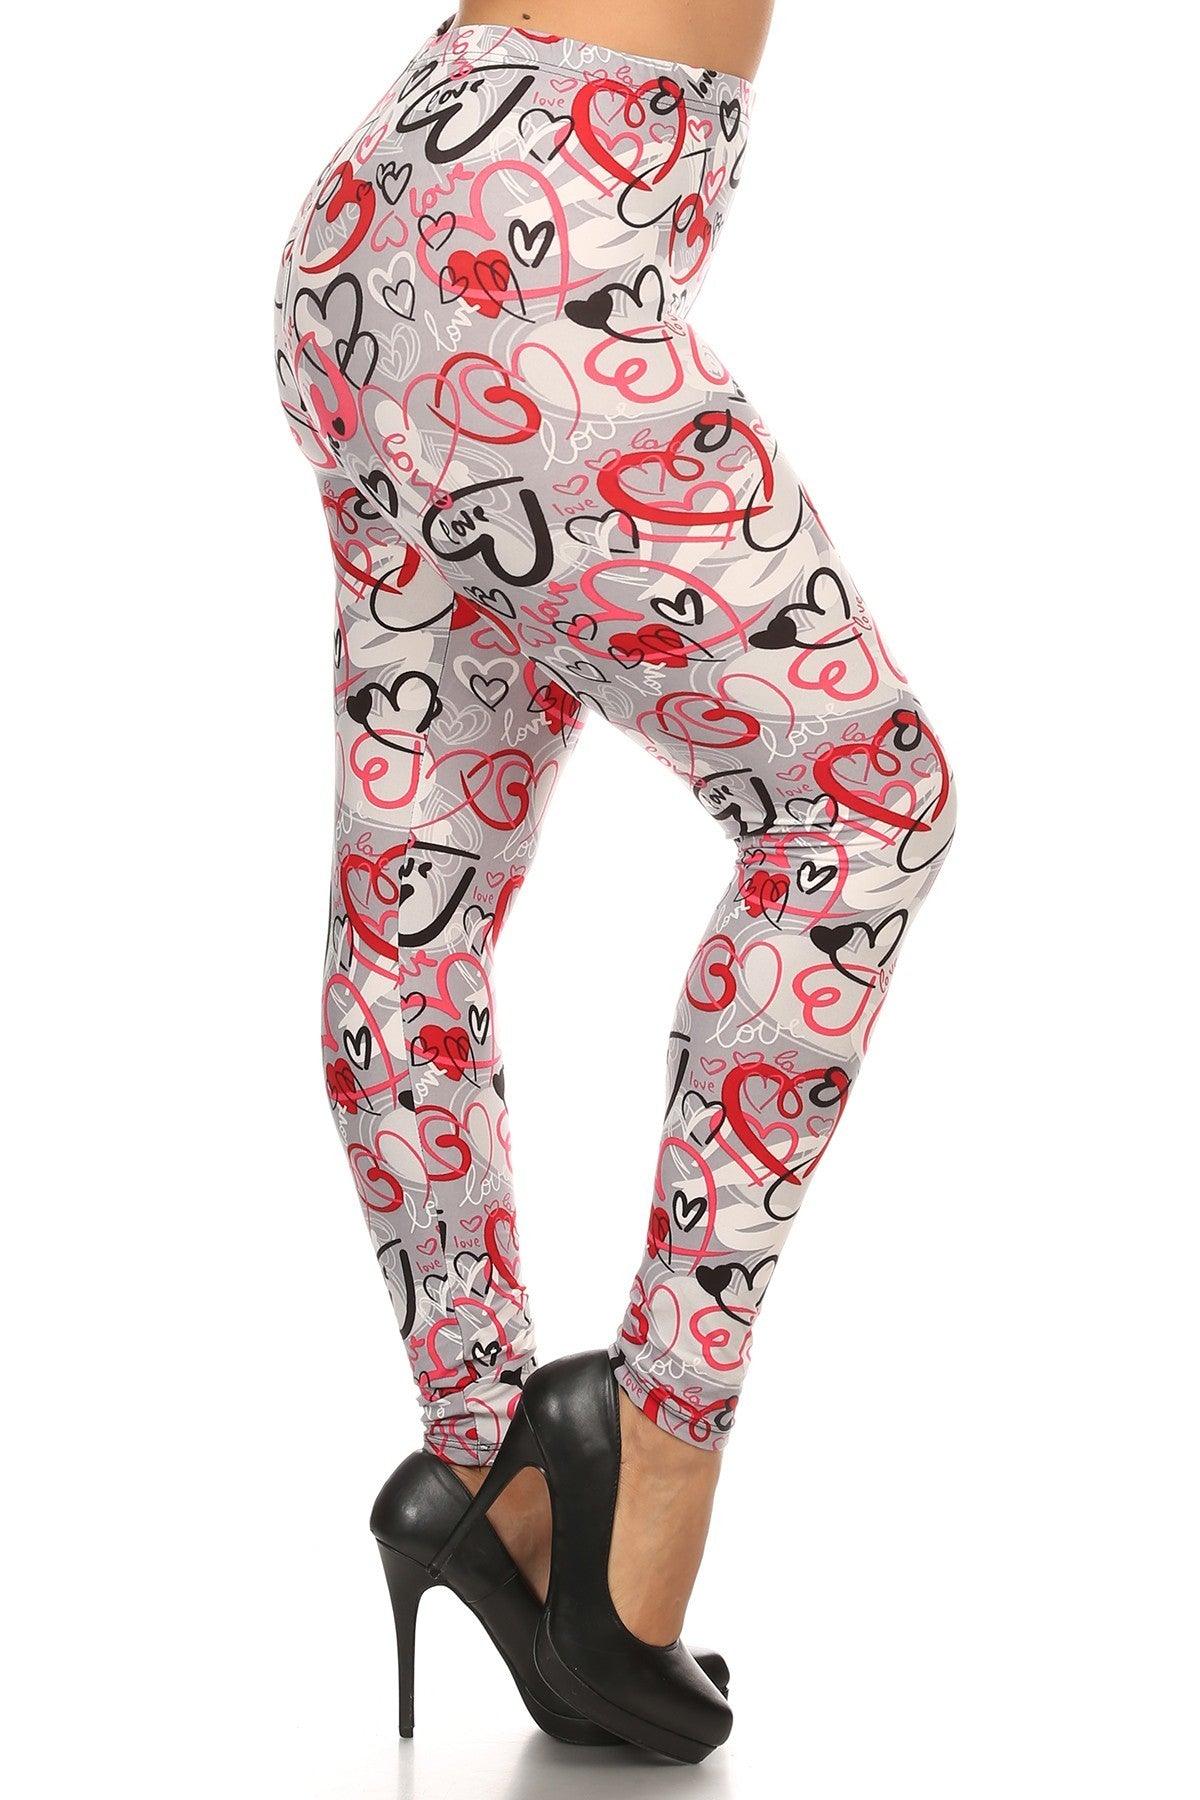 Plus Size Heart Print, Full Length Leggings In A Slim Fitting Style With A Banded High Waist Naughty Smile Fashion